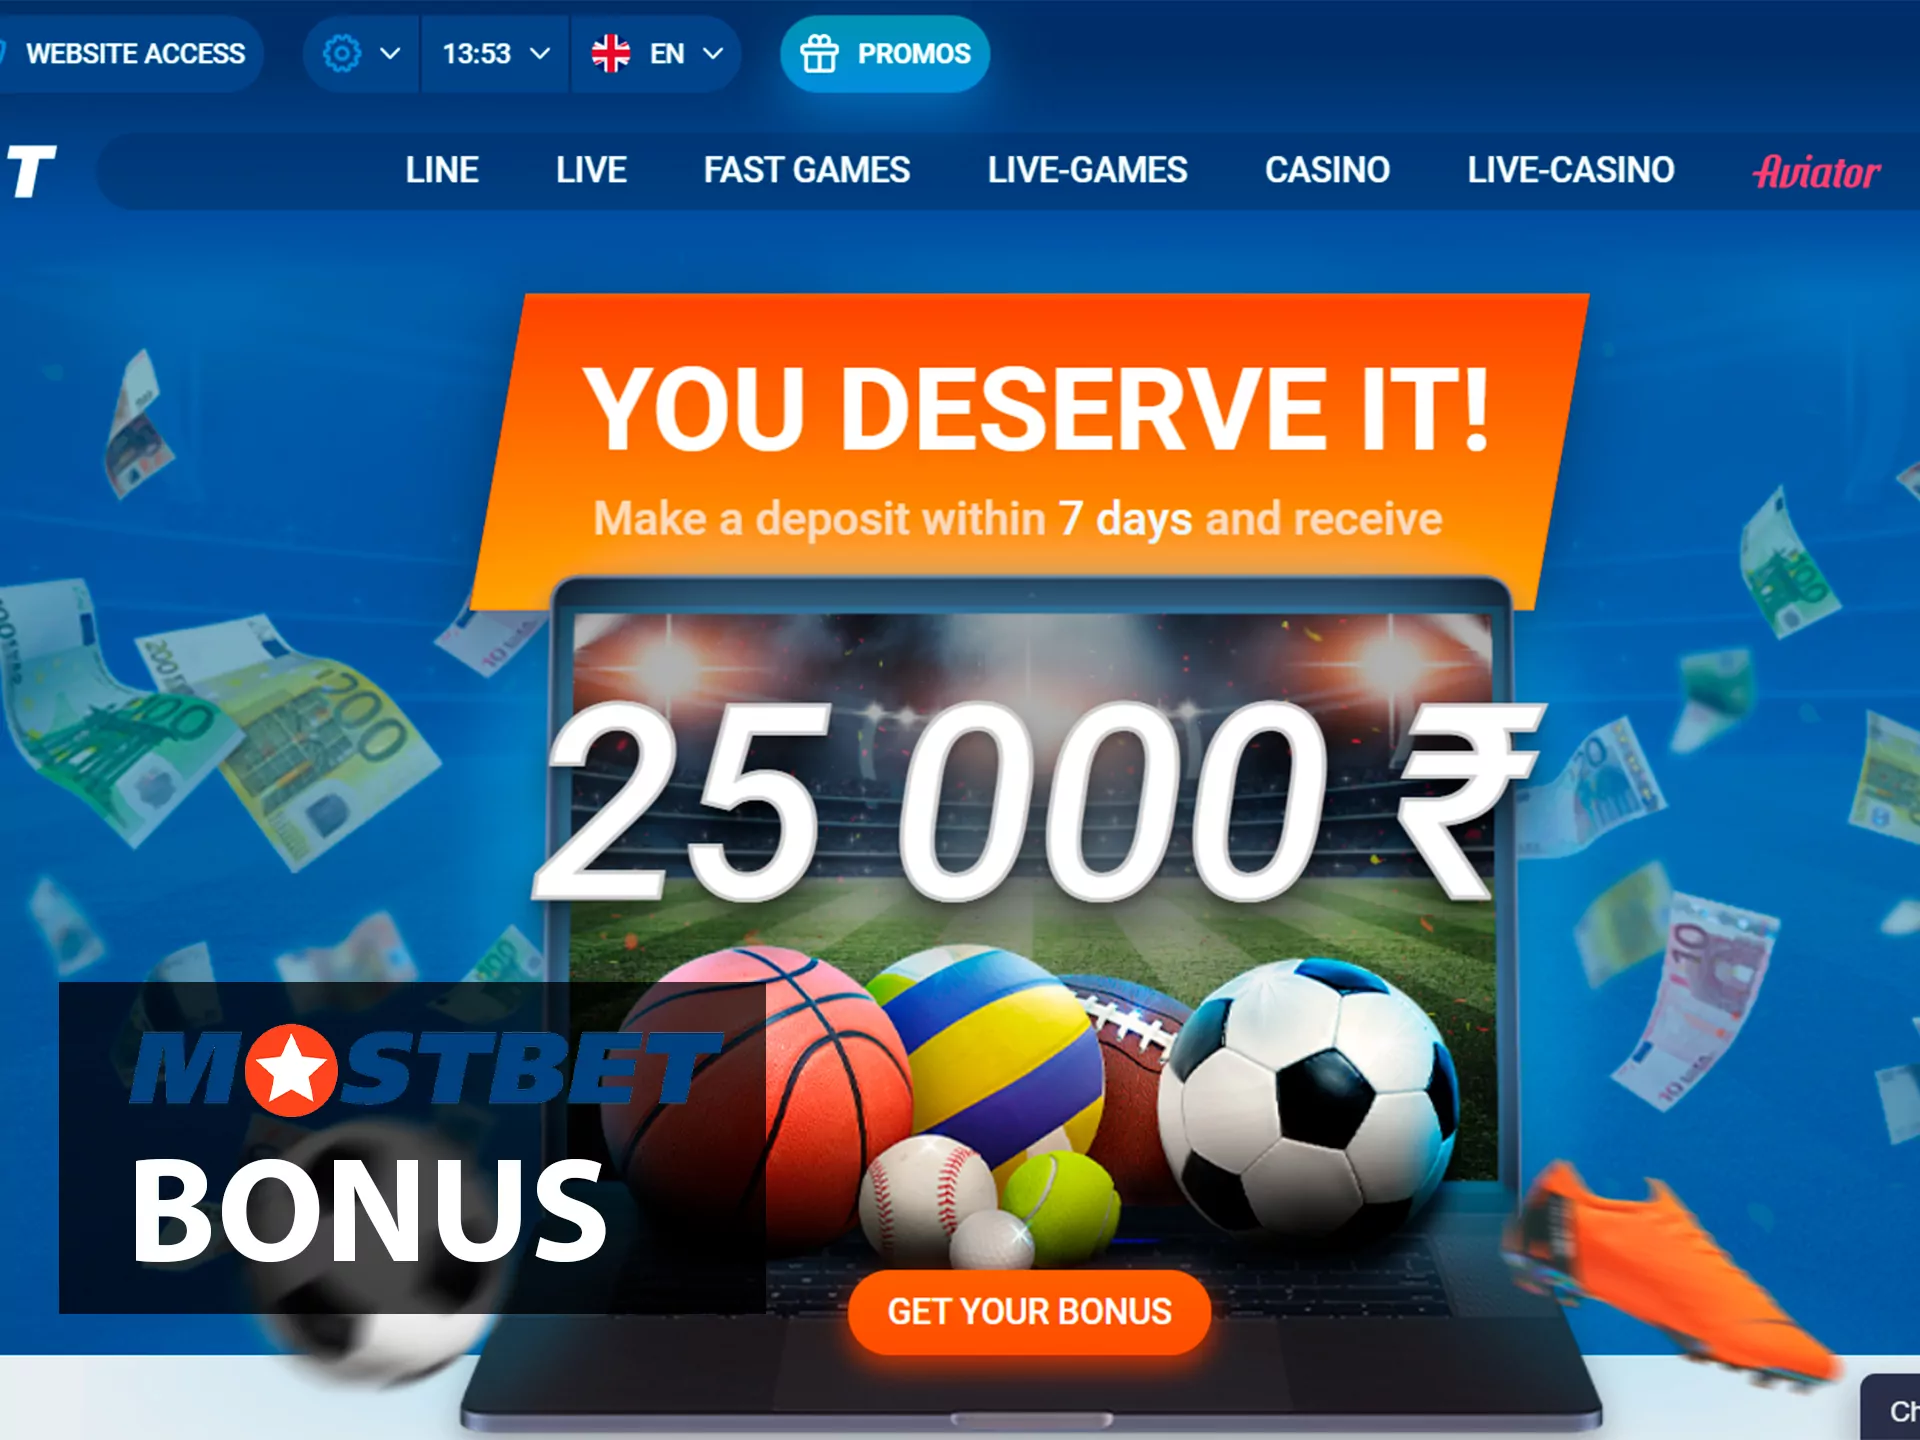 You can get up to 25,000 rupees for betting on sports at Mostbet.